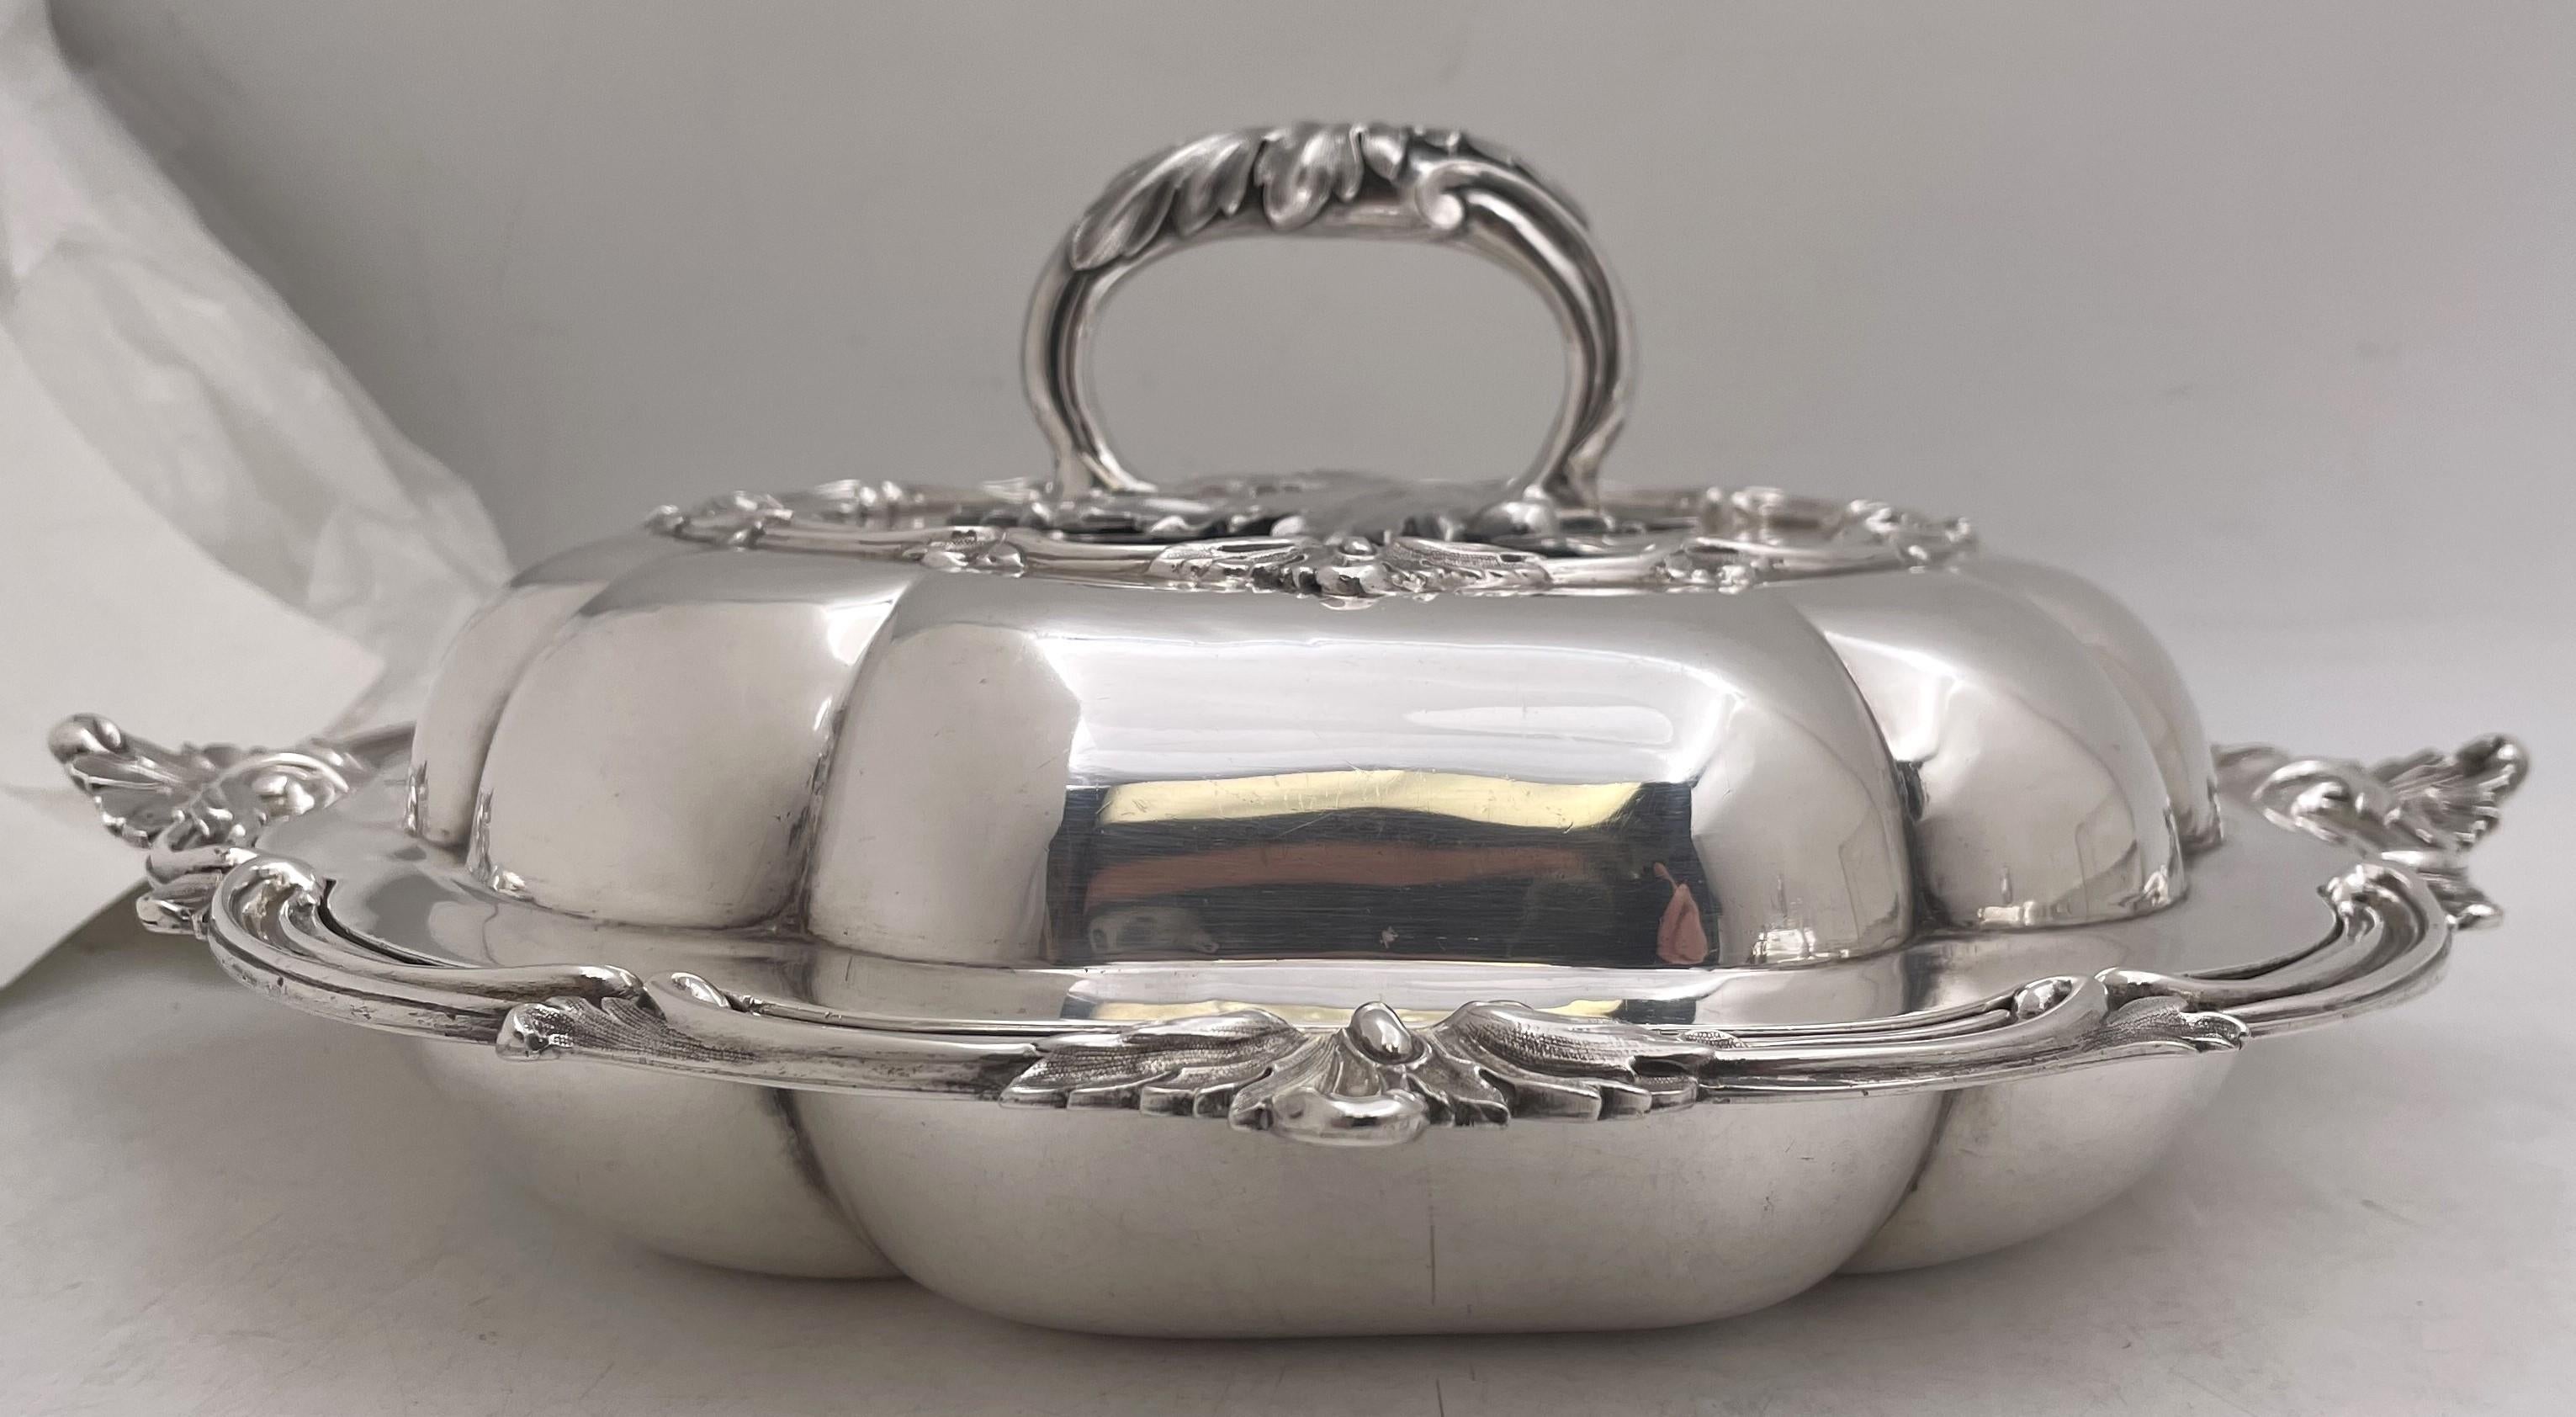 John Samuel Hunt, English pair of sterling silver multi-lobed covered vegetable dishes from 1850 (Victorian era) adorned with curvilinear natural motifs. They measure 12'' by 12'' by 4 3/4'' in height, weigh 97 troy ounces, and bear hallmarks as